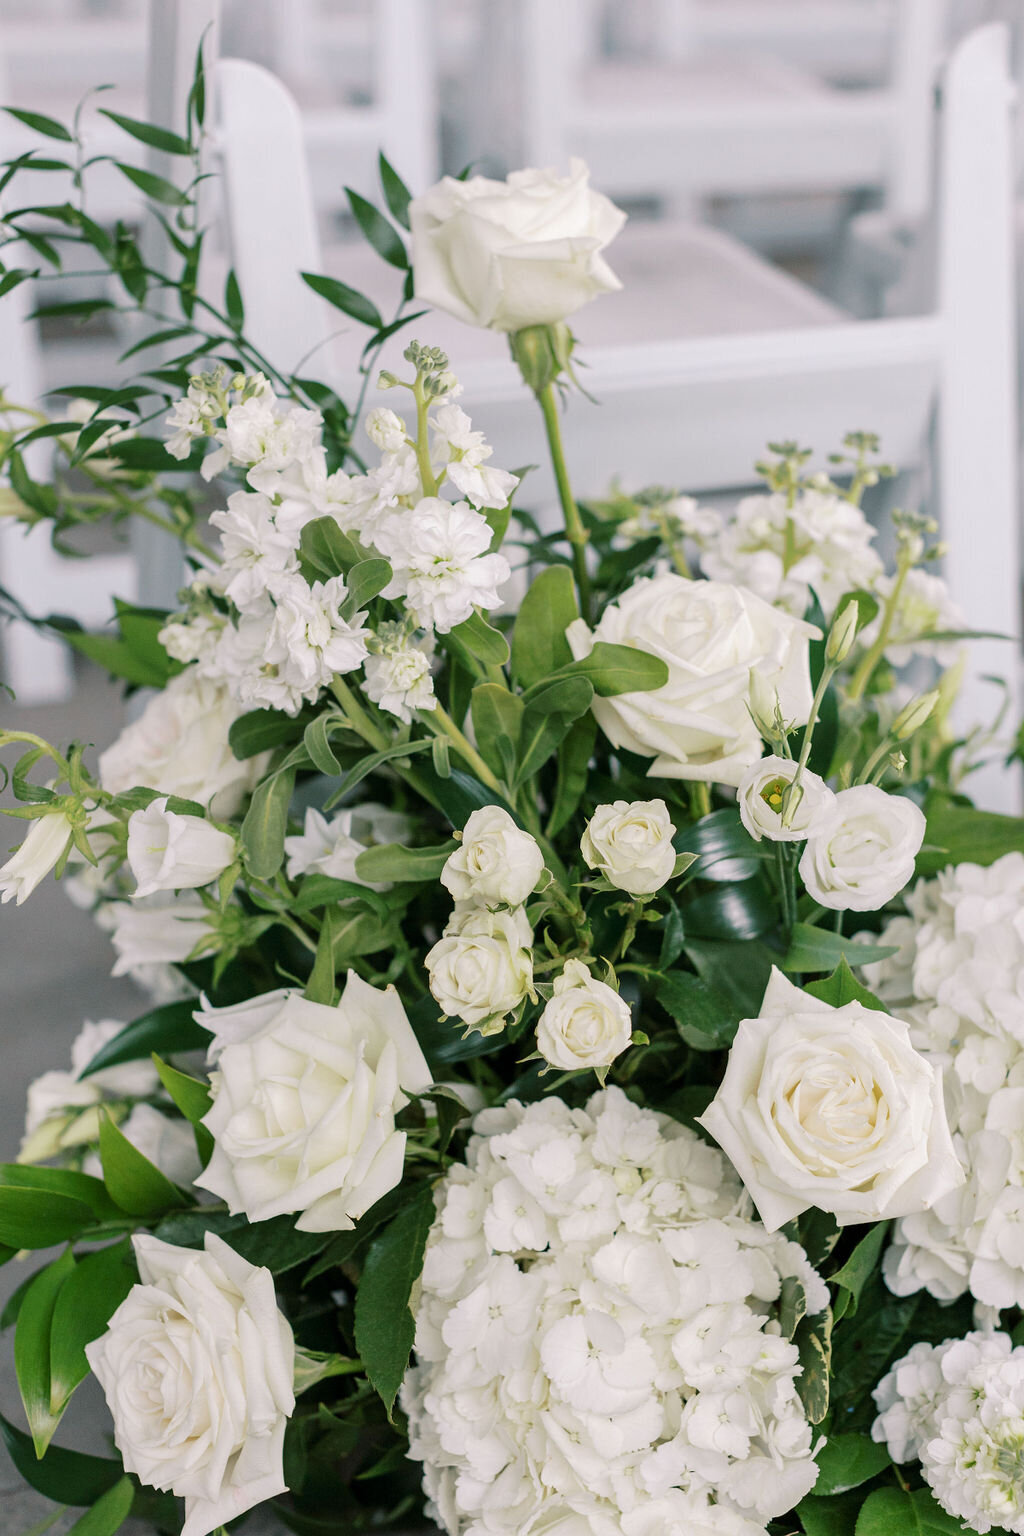 A beautiful white wedding at Whistle Bear Golf Club - Wedding + Design by Twelfth Night Events (Cambridge, Ontario Wedding Planners)